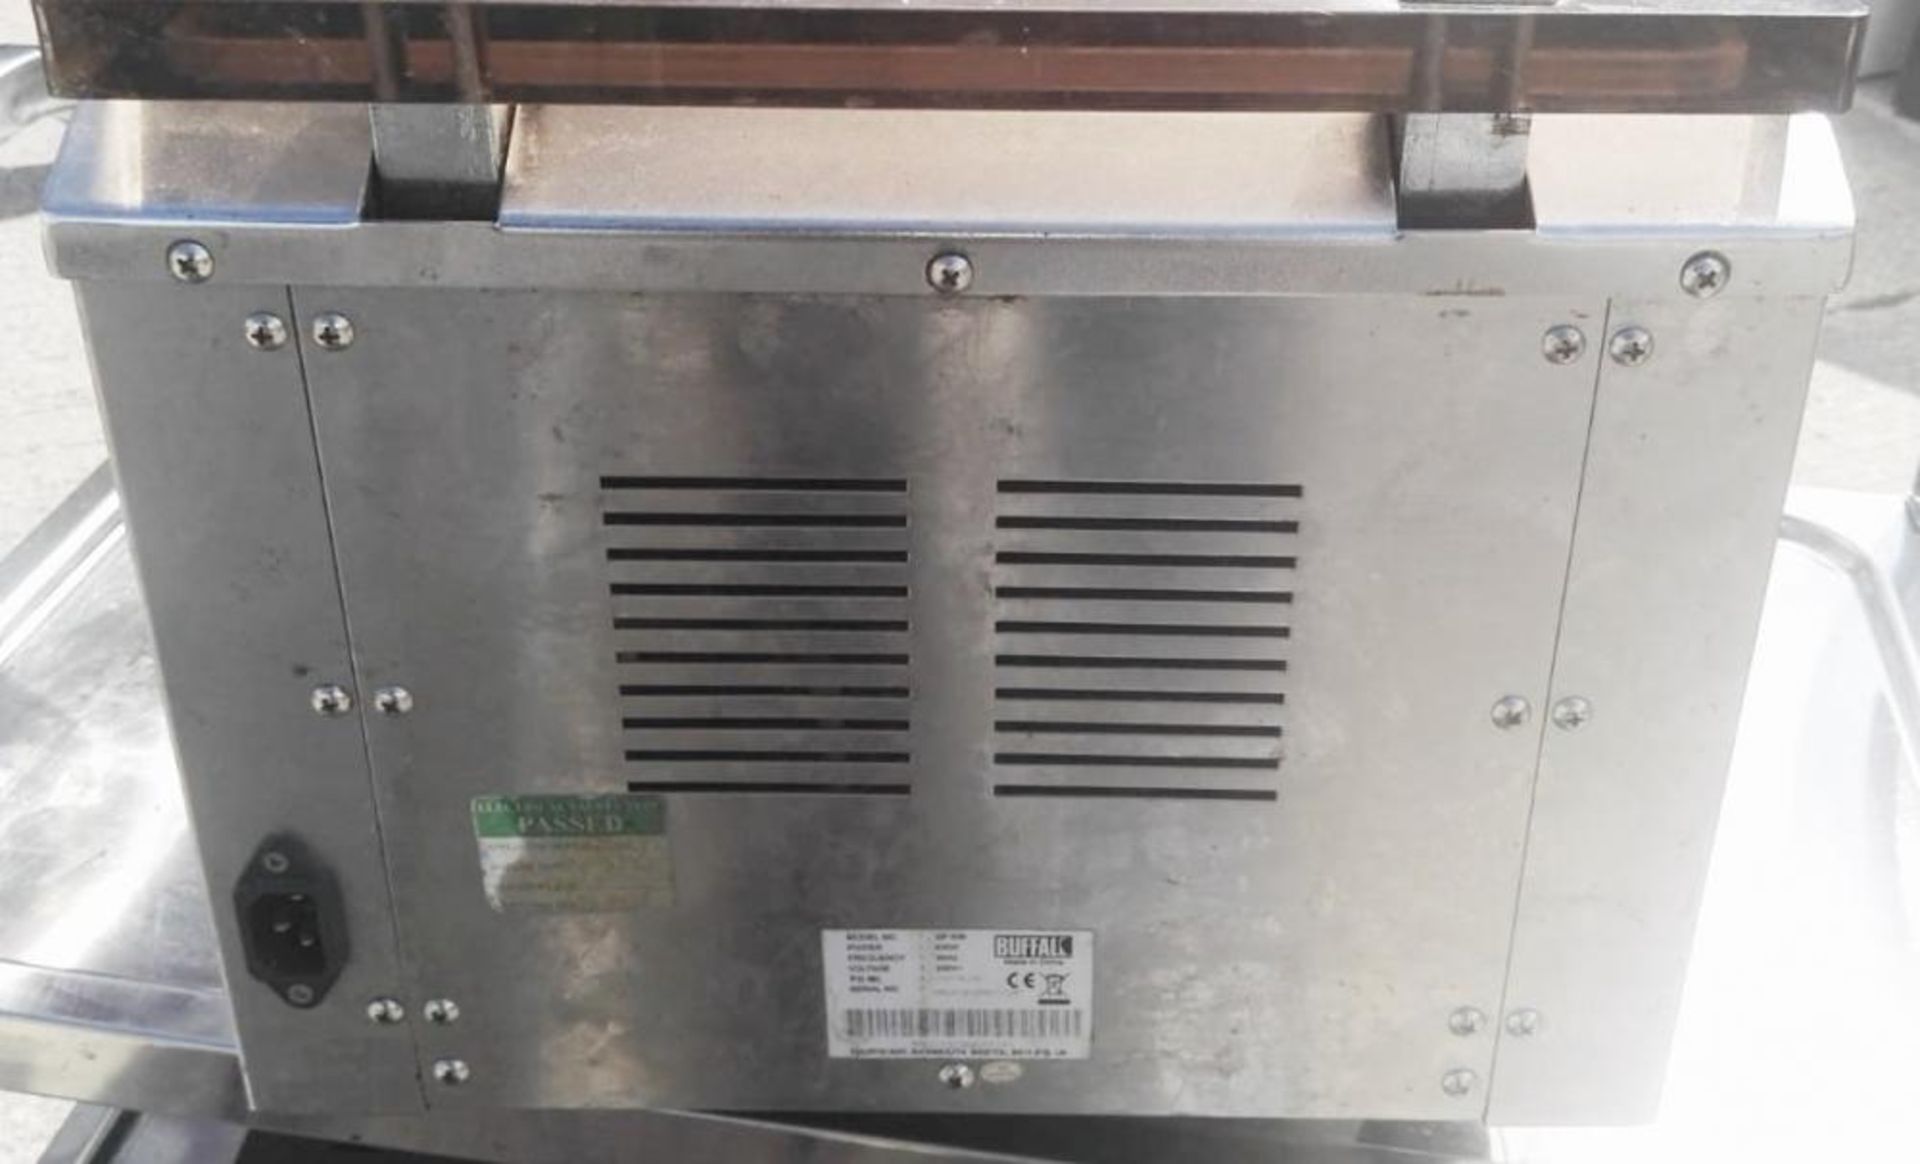 1 x BUFFALO GF439 Chamber Vacuum Pack Machine - Pre-owned, Taken From An Asian Fusion Restaurant - R - Image 4 of 5